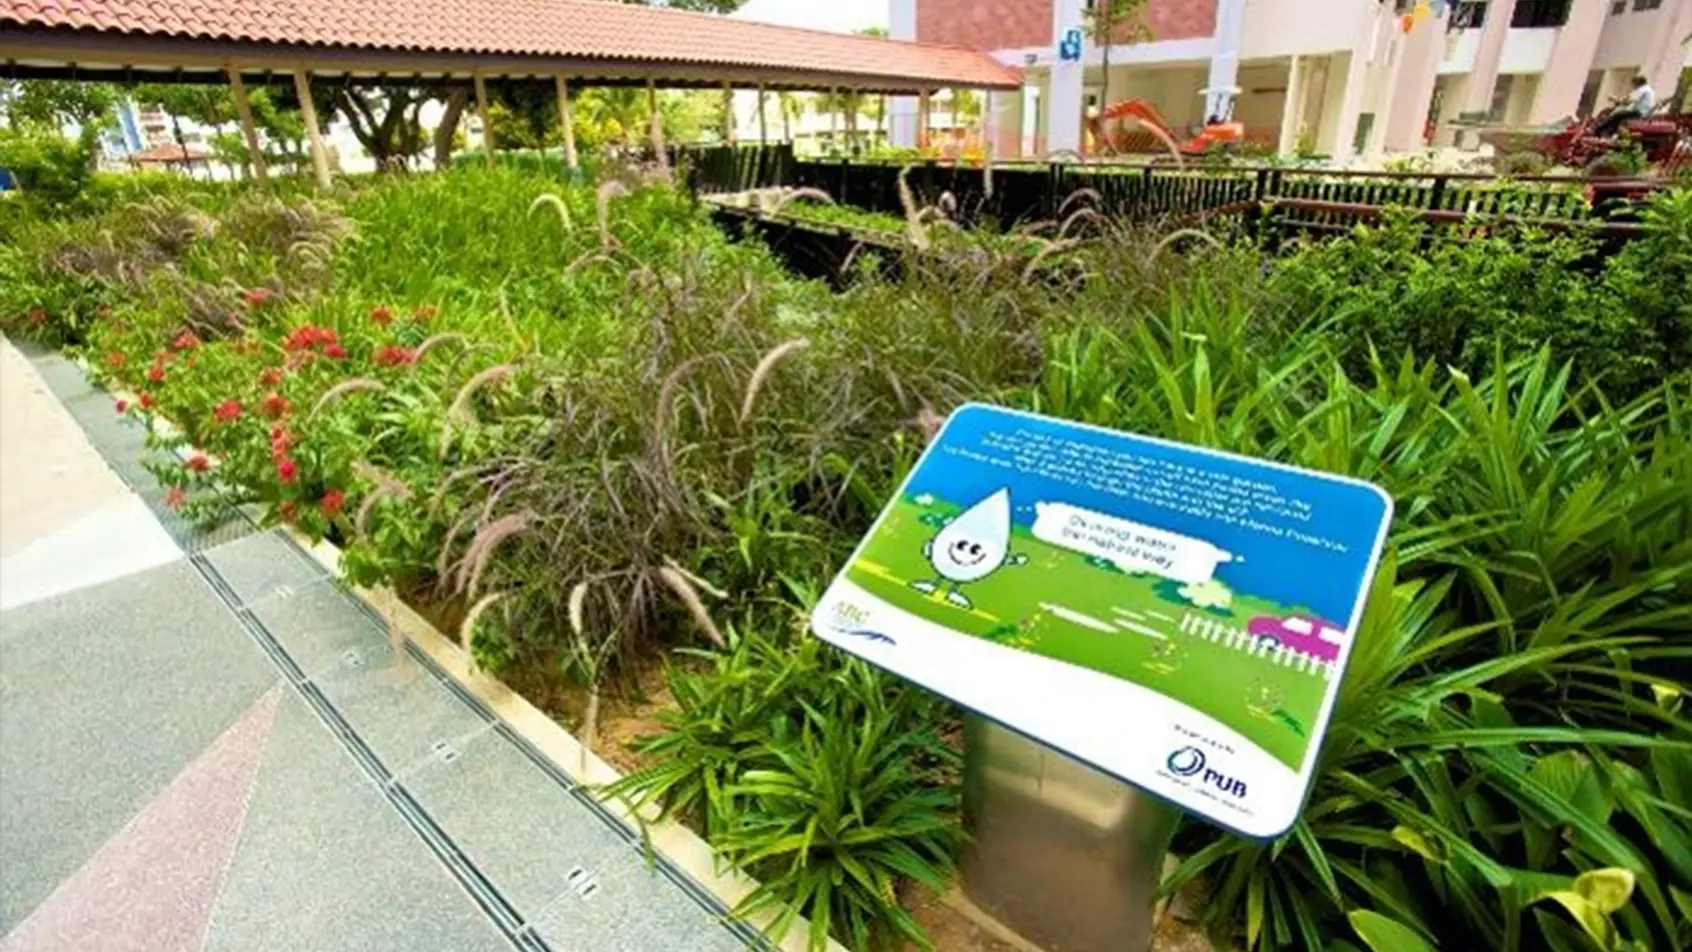 Singapore, a green city, relies on rainfall and innovative water treatments such as “reverse osmosis” to combat water scarcity. It also turns seawater into drinking water and collects rainwater for non-potable uses. Examples of initiatives include NEWater Magic for clean drinking water, and Rainwater Friends for plant irrigation. PUN, Singapore’s national water authority, also reaches out to children and families with water education activities. 